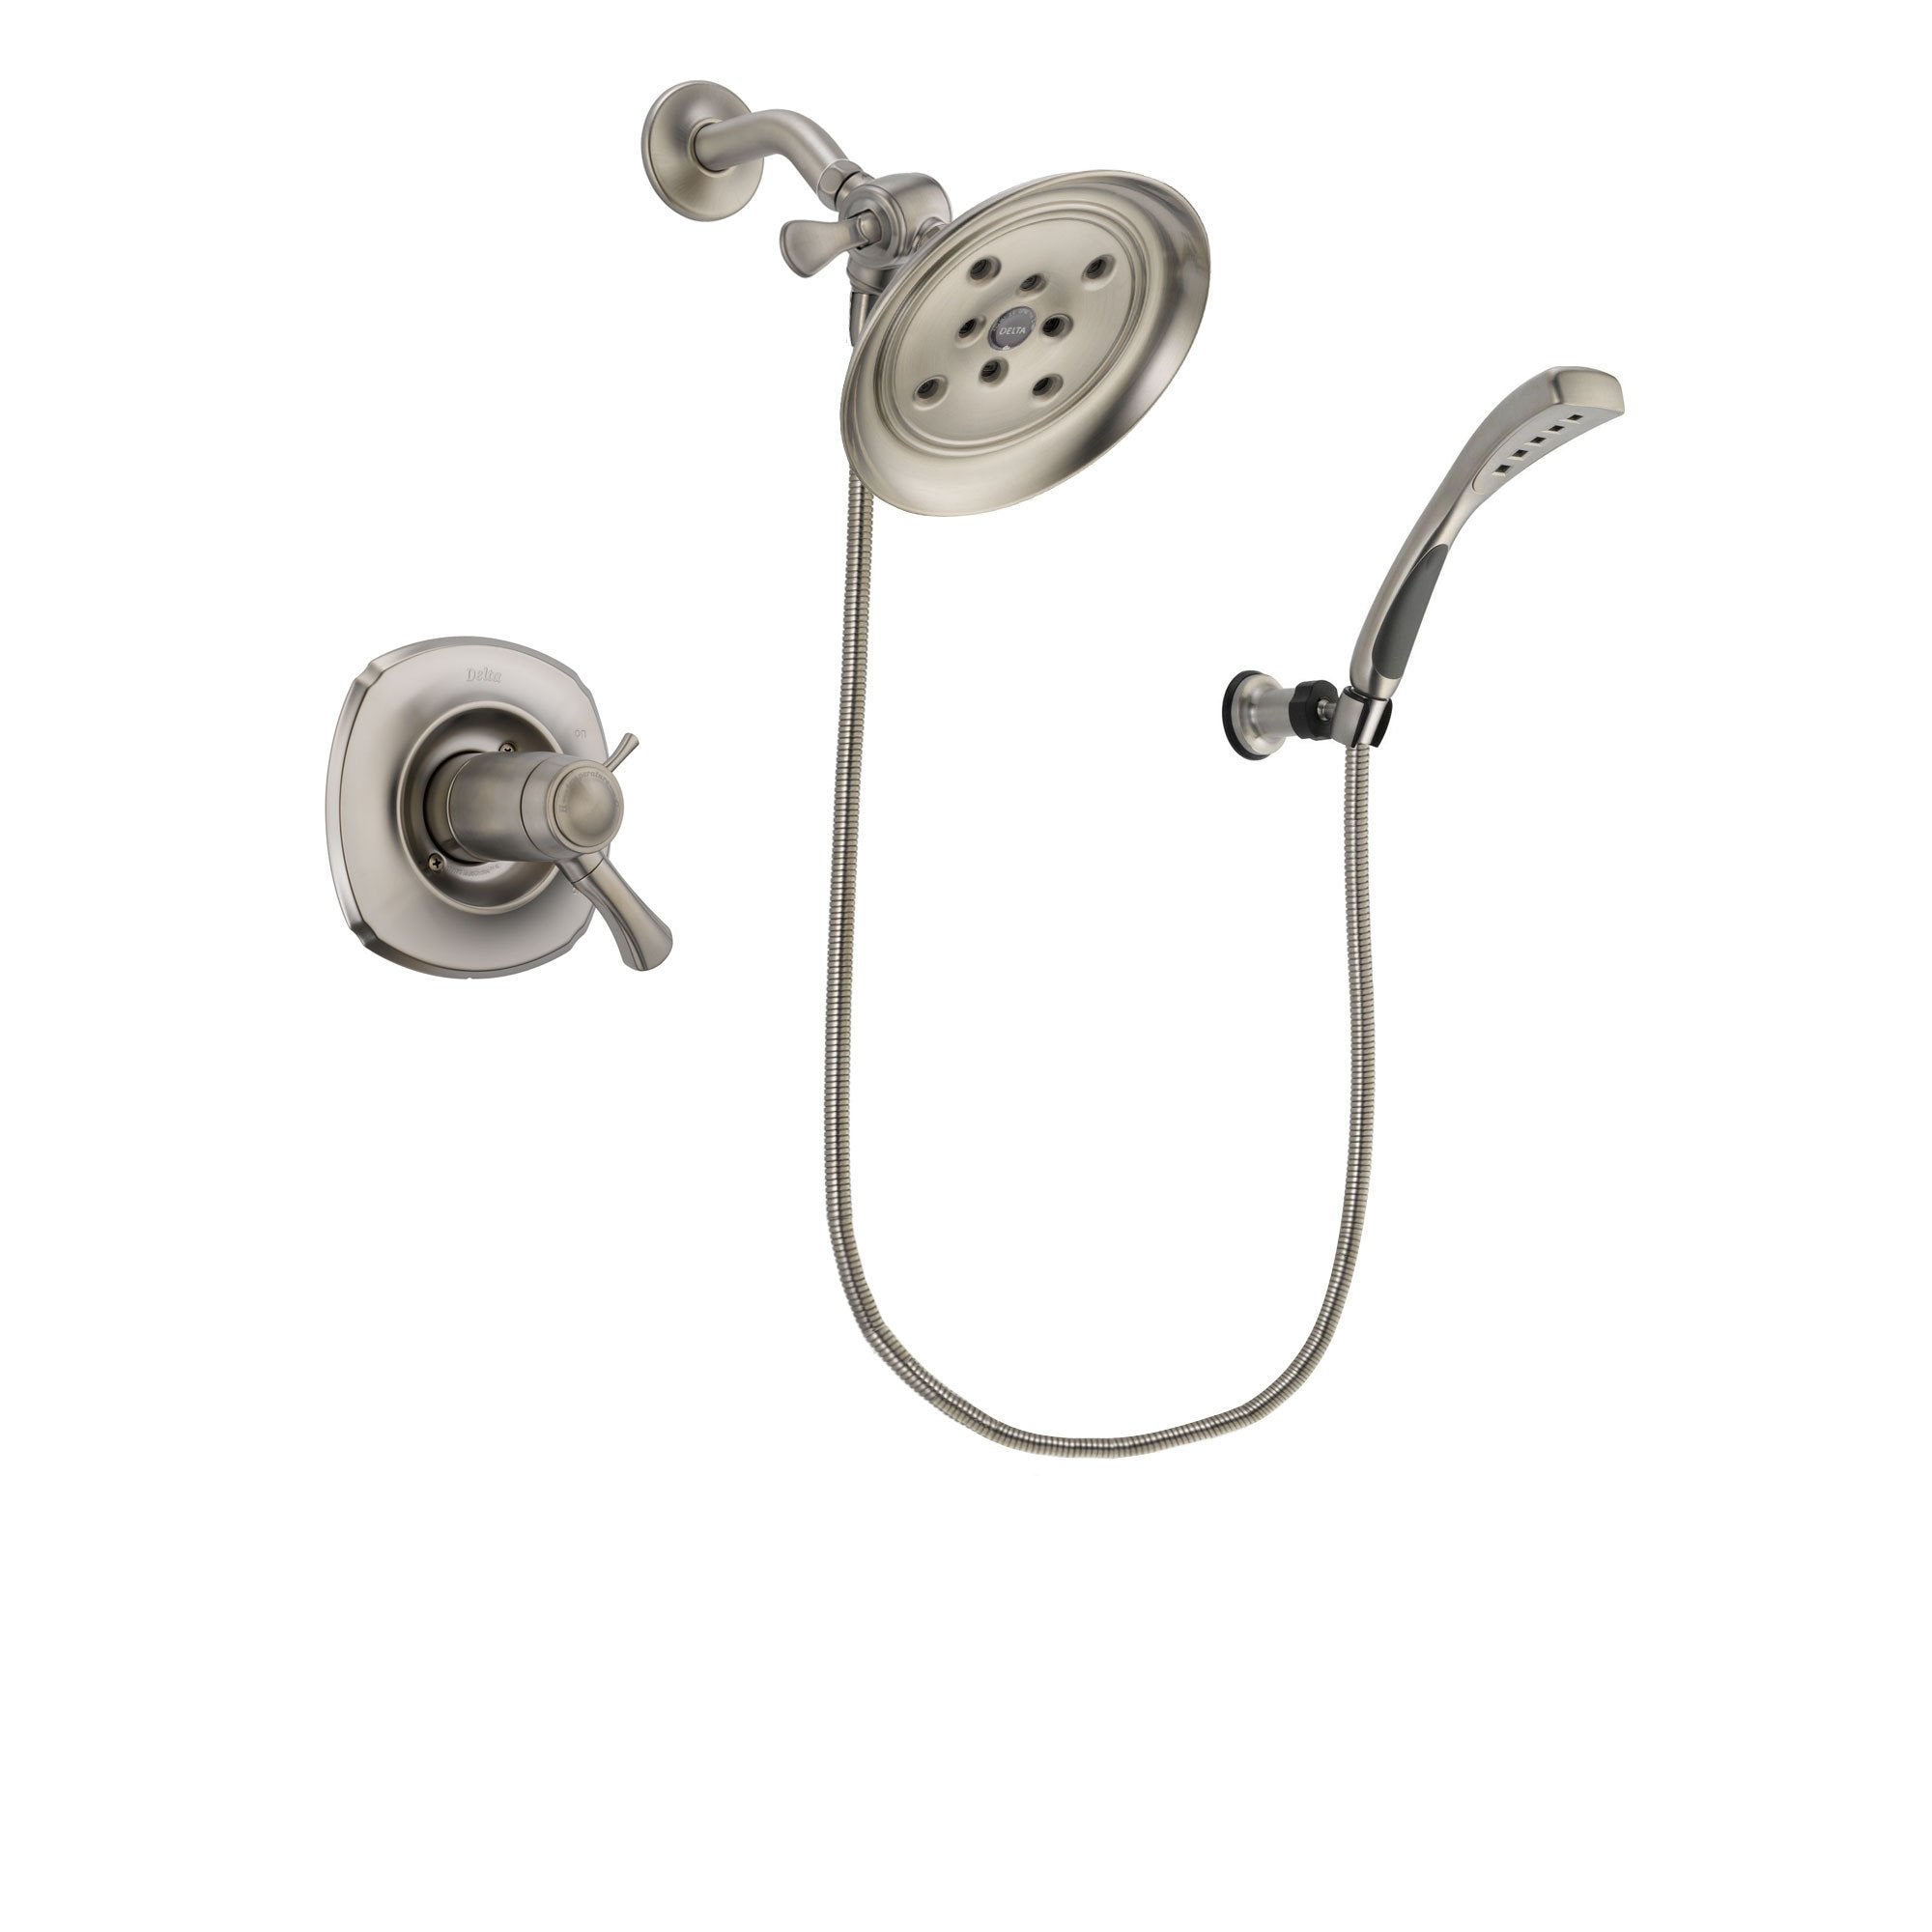 Delta Addison Stainless Steel Finish Thermostatic Shower Faucet System Package with Large Rain Showerhead and Wall Mounted Handshower Includes Rough-in Valve DSP1860V